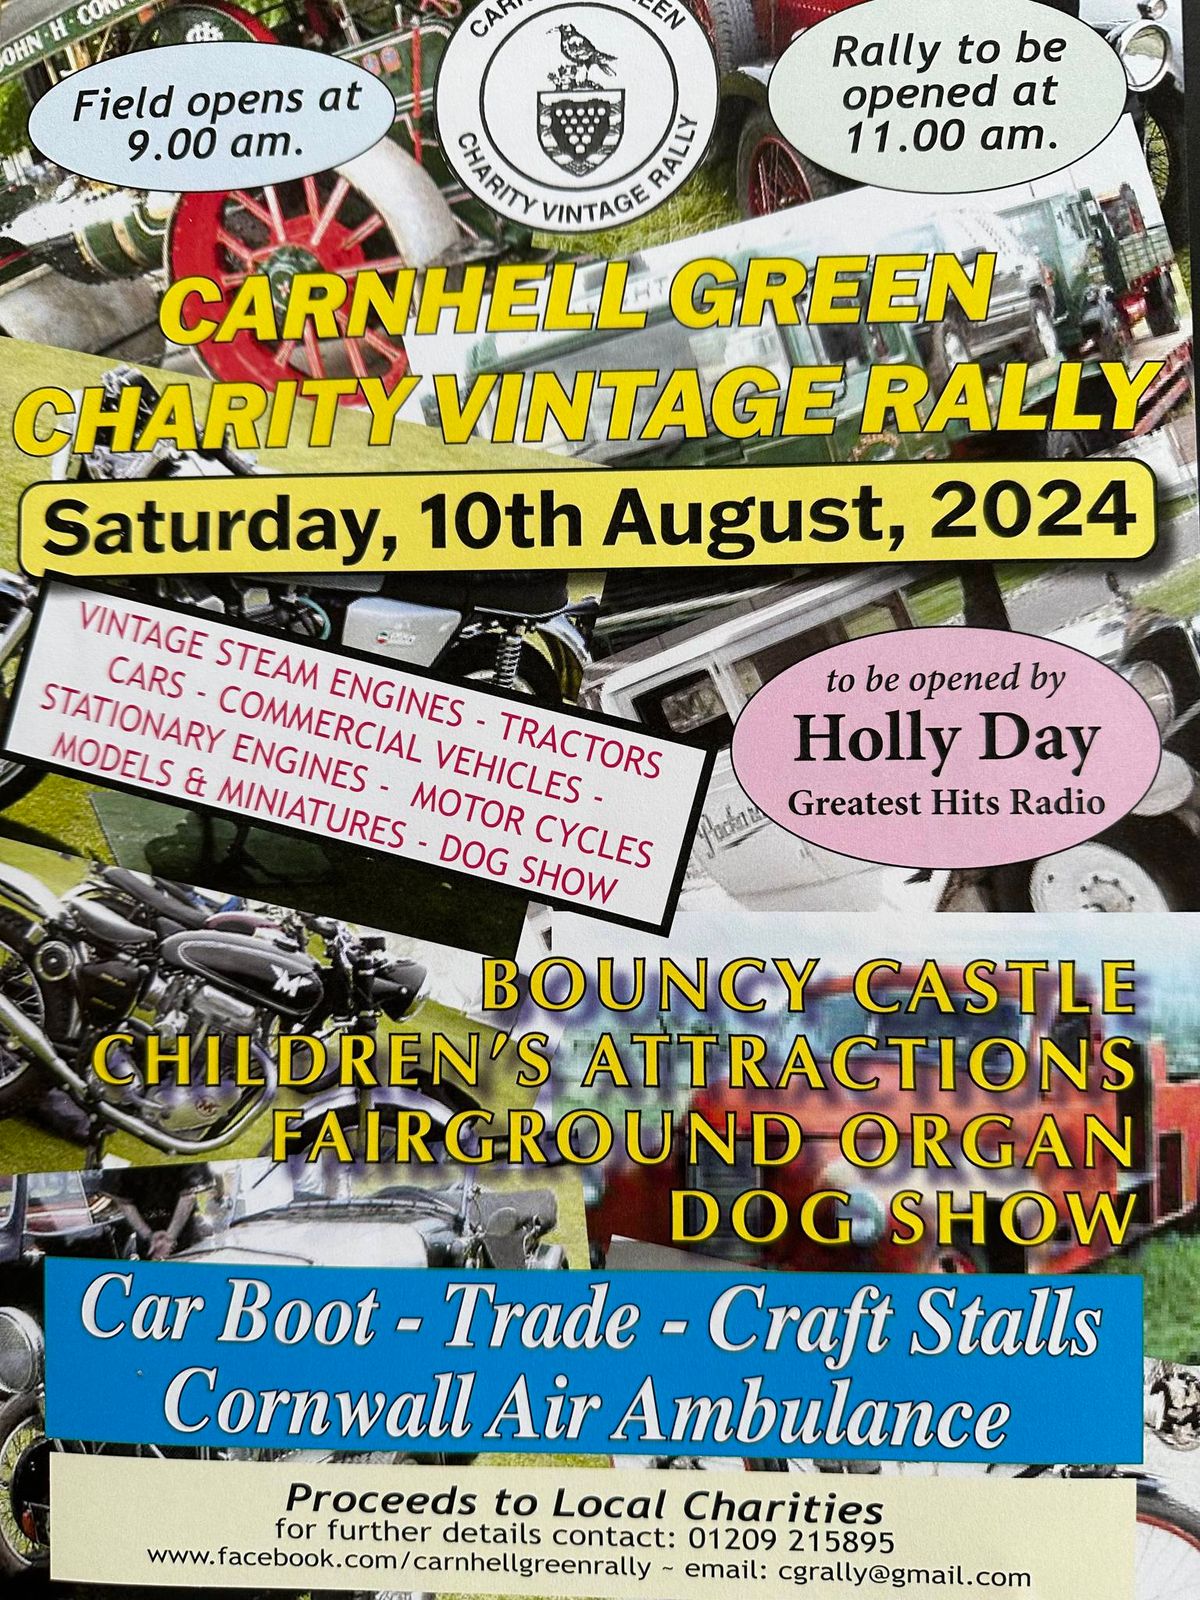 Carnhell Green Charity Vintage Rally